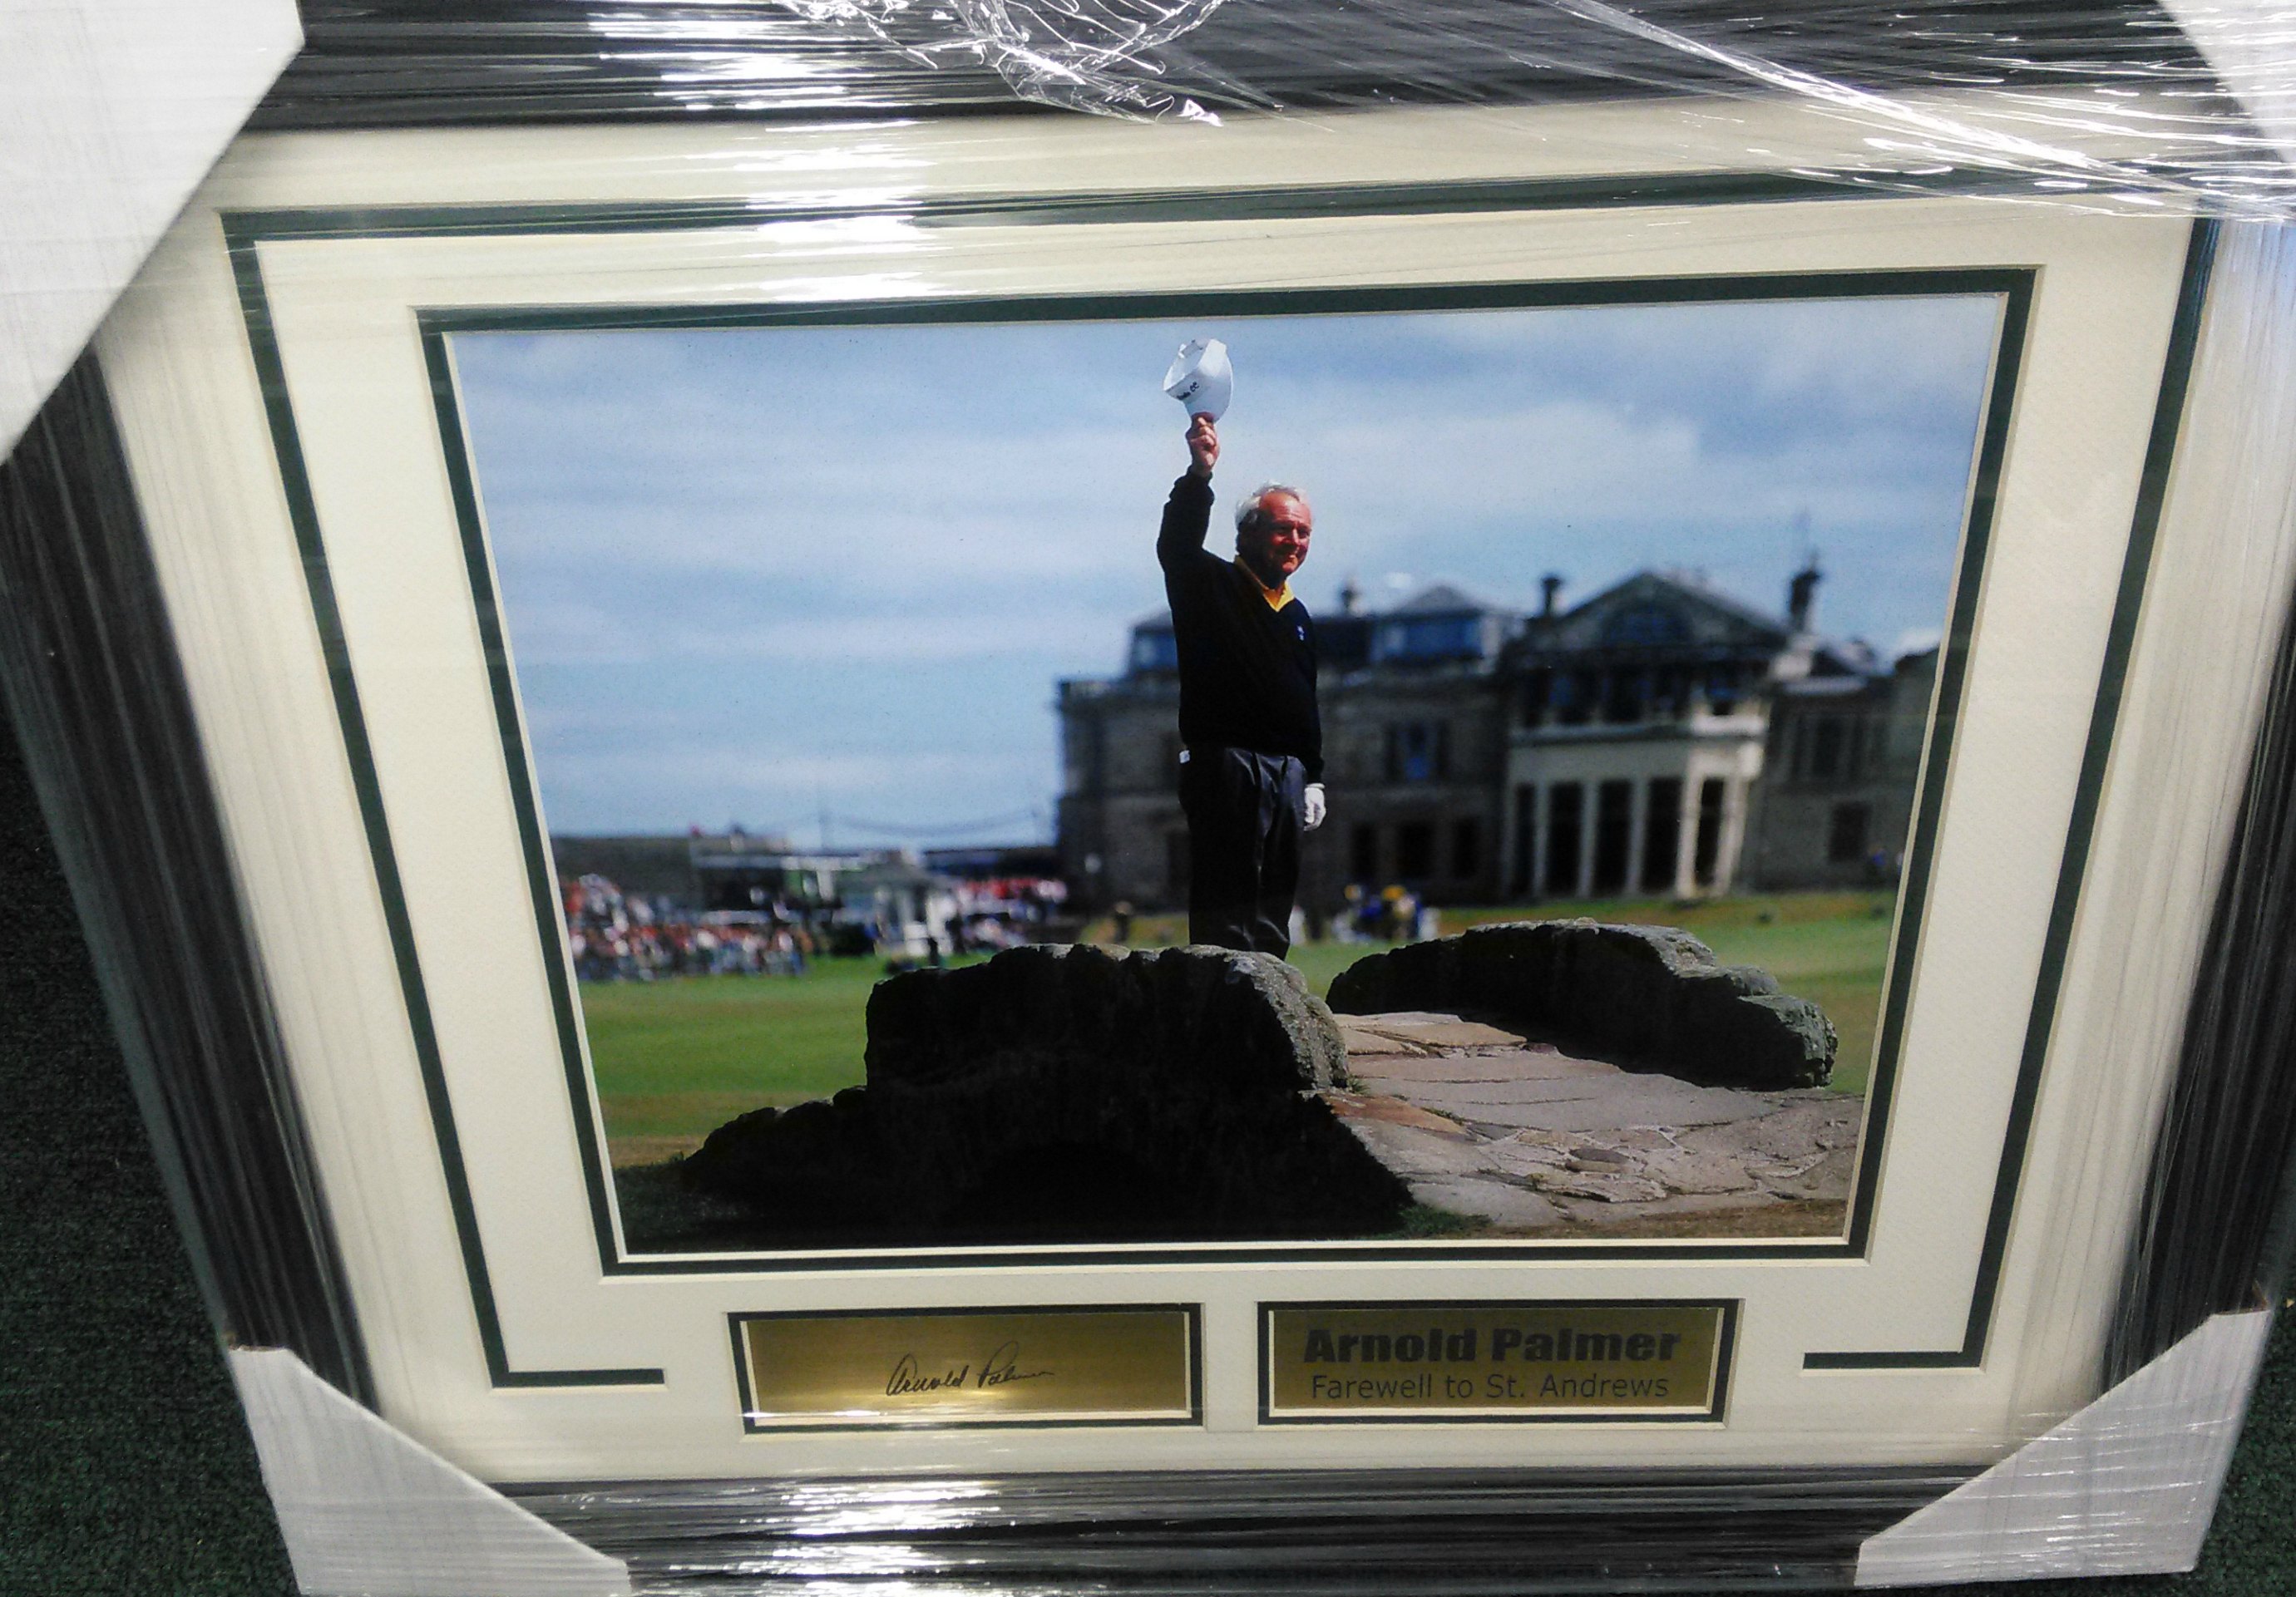 Arnold Palmer Farewell to St. Andrews 12x18 w/ laser engraved signature